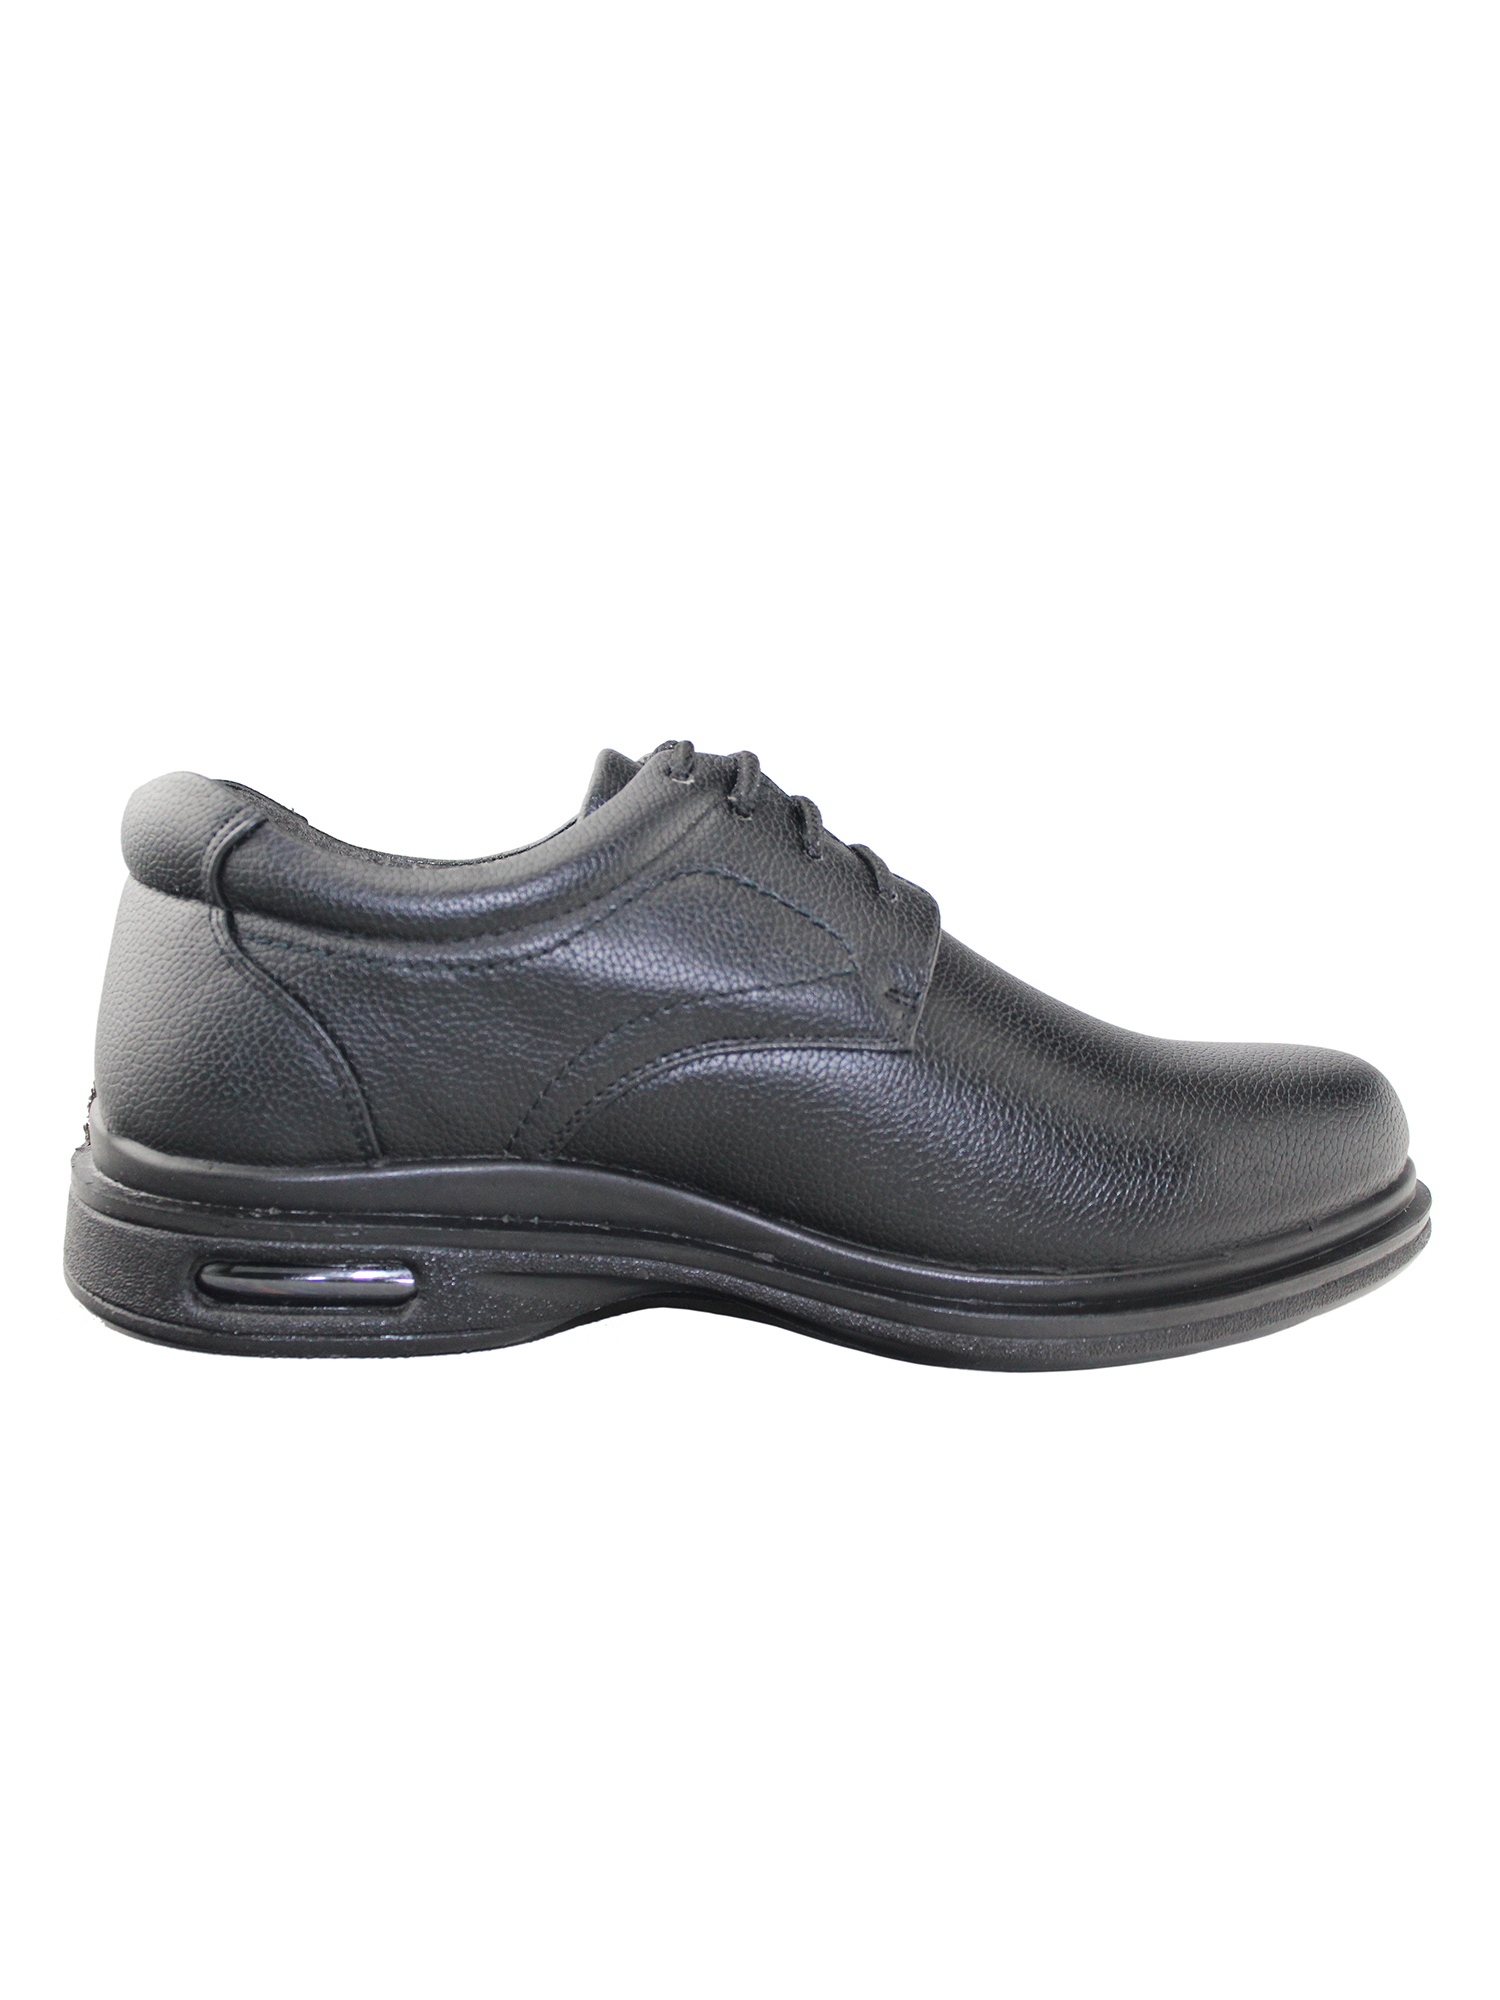 Mens Lightweight Non-Slip And Oil Resistant Shoes Autumn Winter Comfortable Air-Cushioning Casual Shoes - image 3 of 5